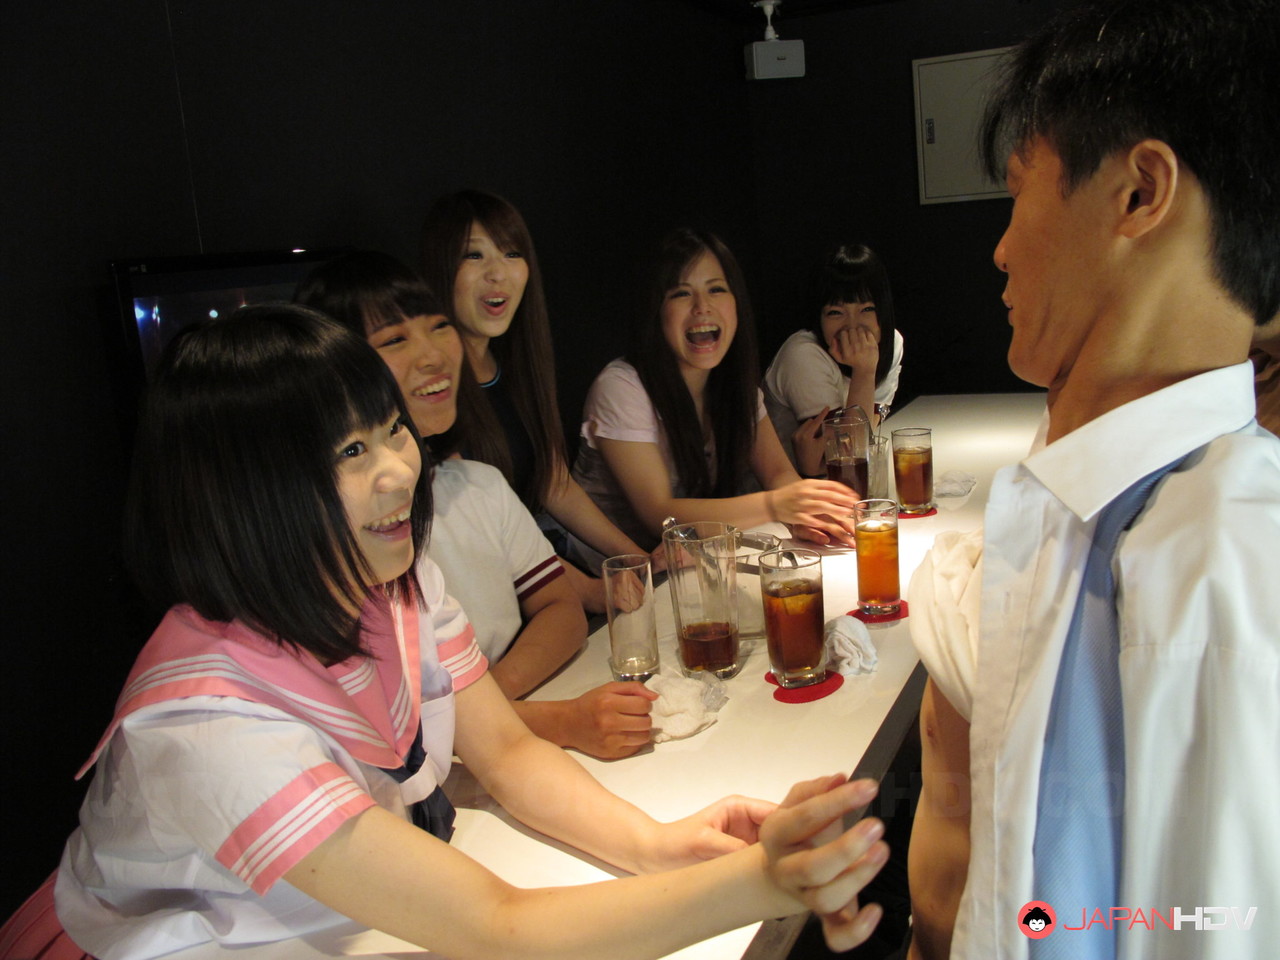 Asian cutie Mio Kosaki and her friends suck and jerk off dongs in a bar foto porno #426551978